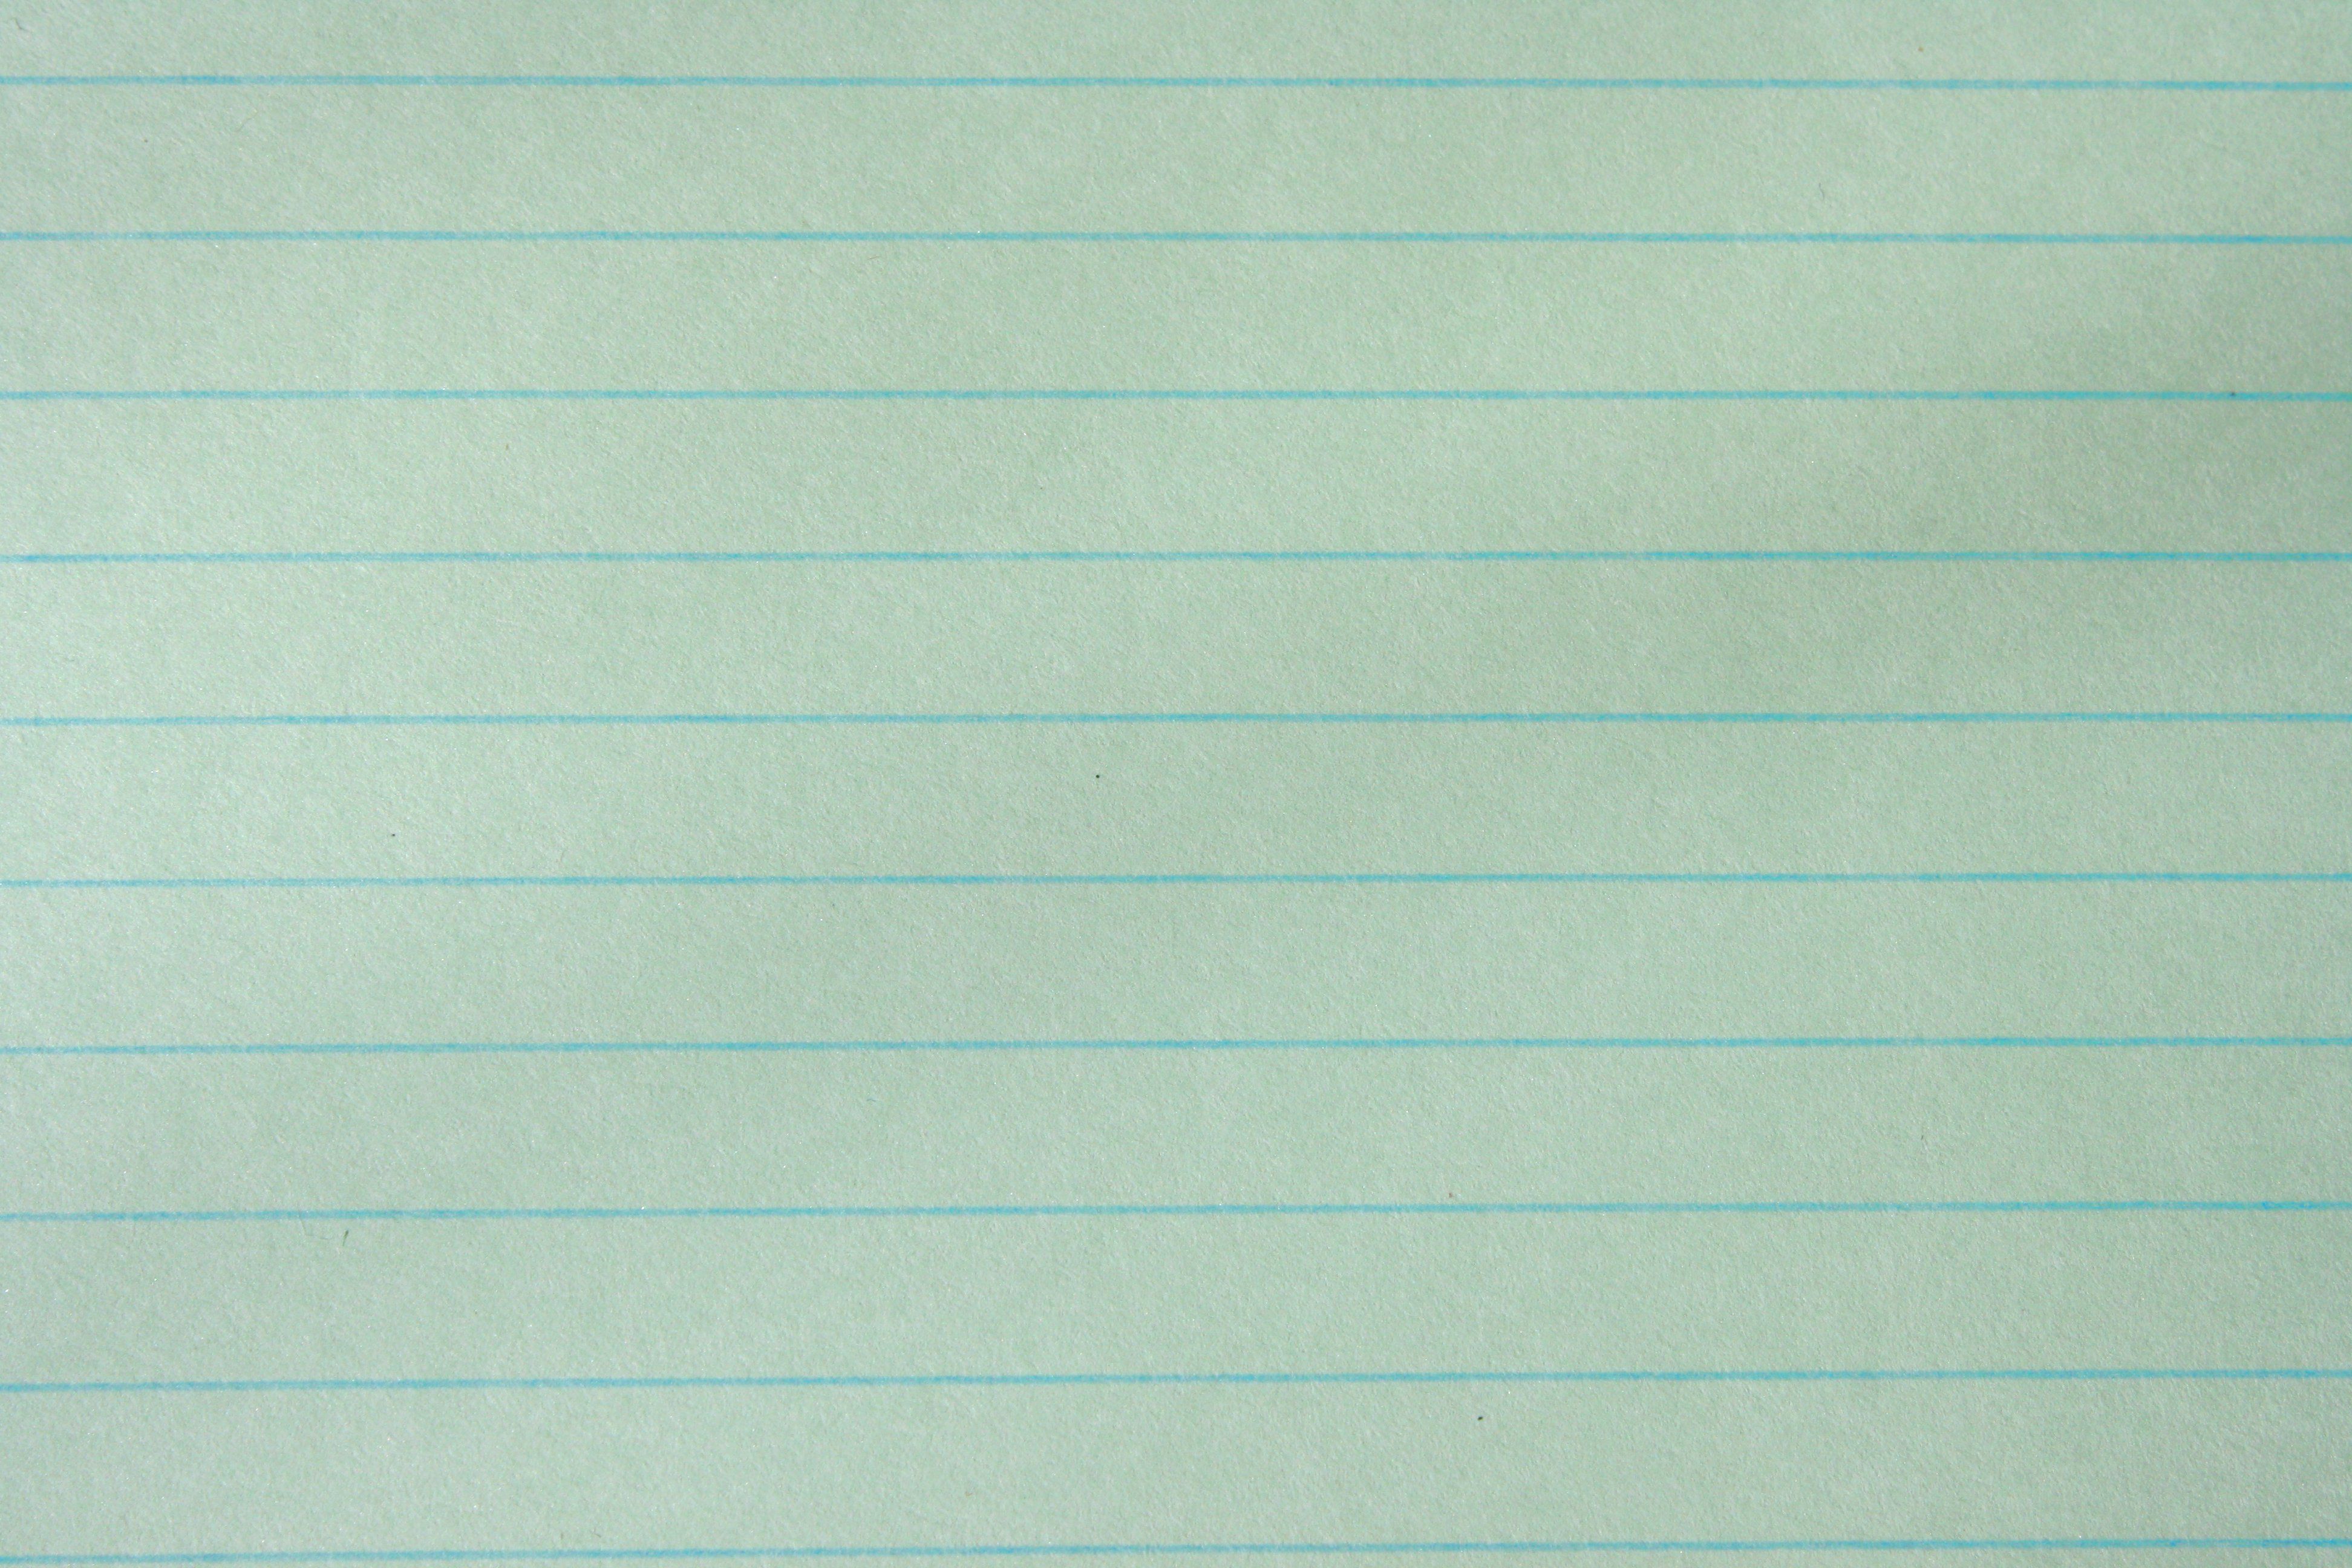 Green Notebook Paper Texture Picture | Free Photograph | Photos ...